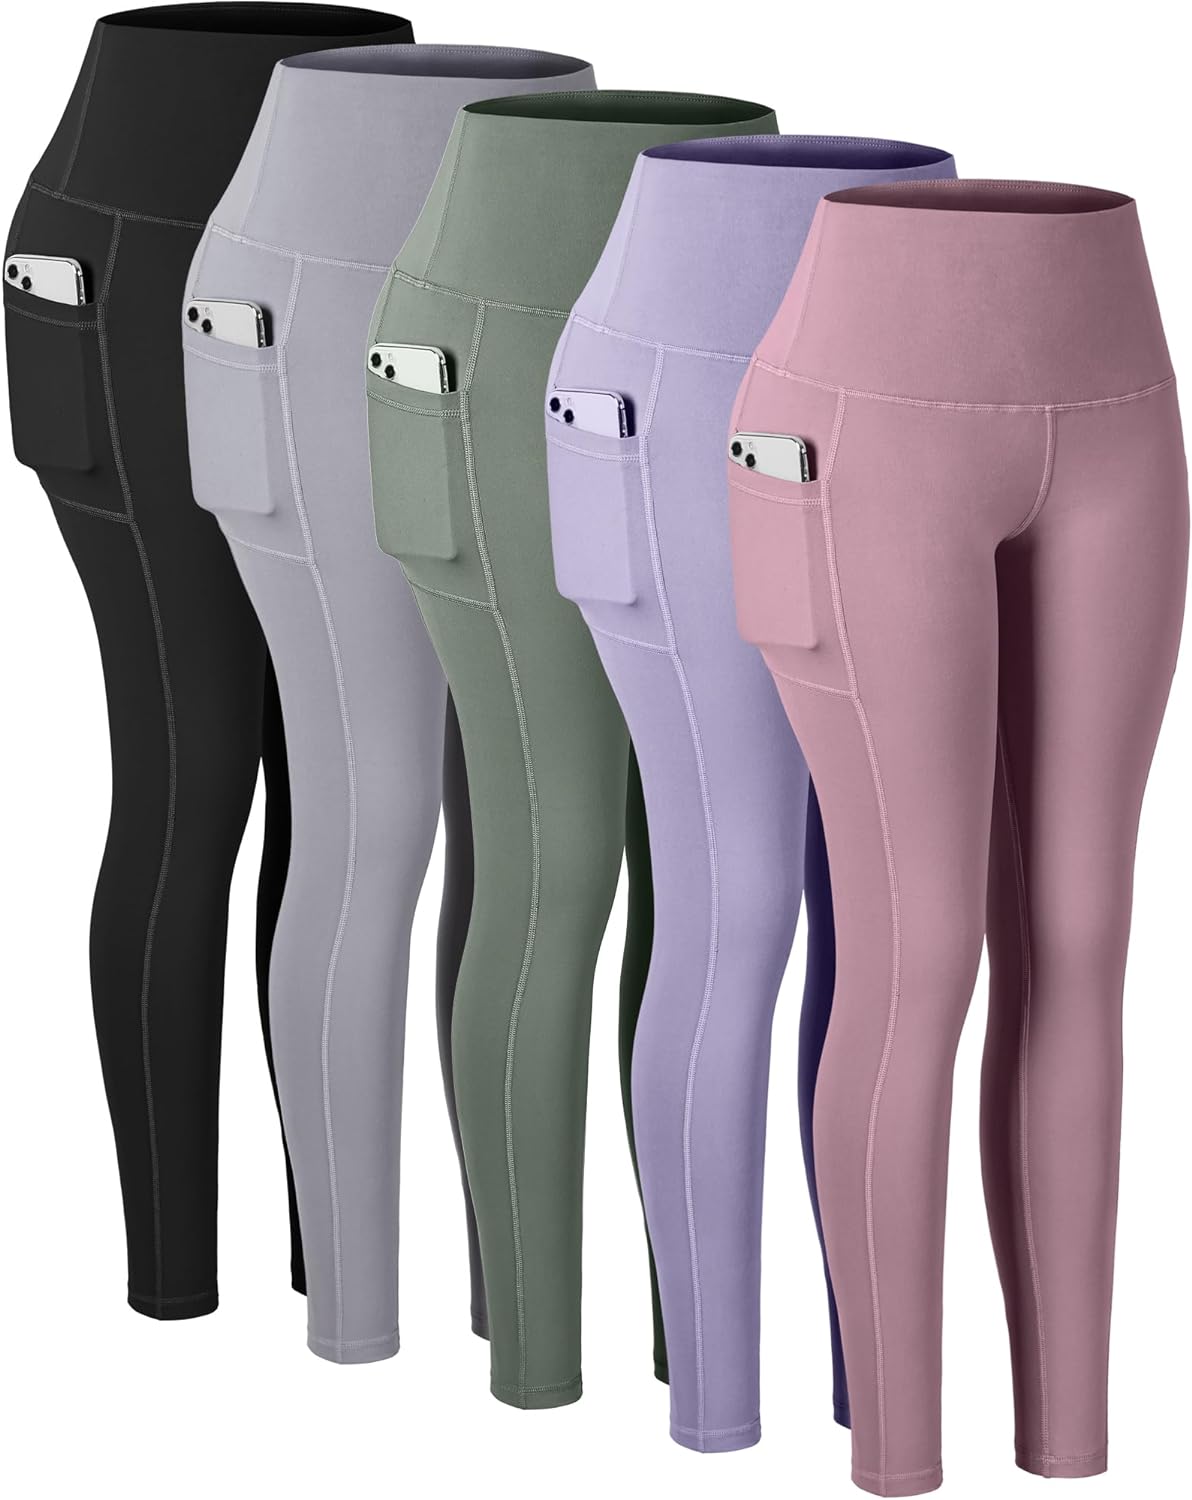 CHRLEISURE Leggings with Pockets for Women, High Waisted Tummy Control Workout Yoga Pants